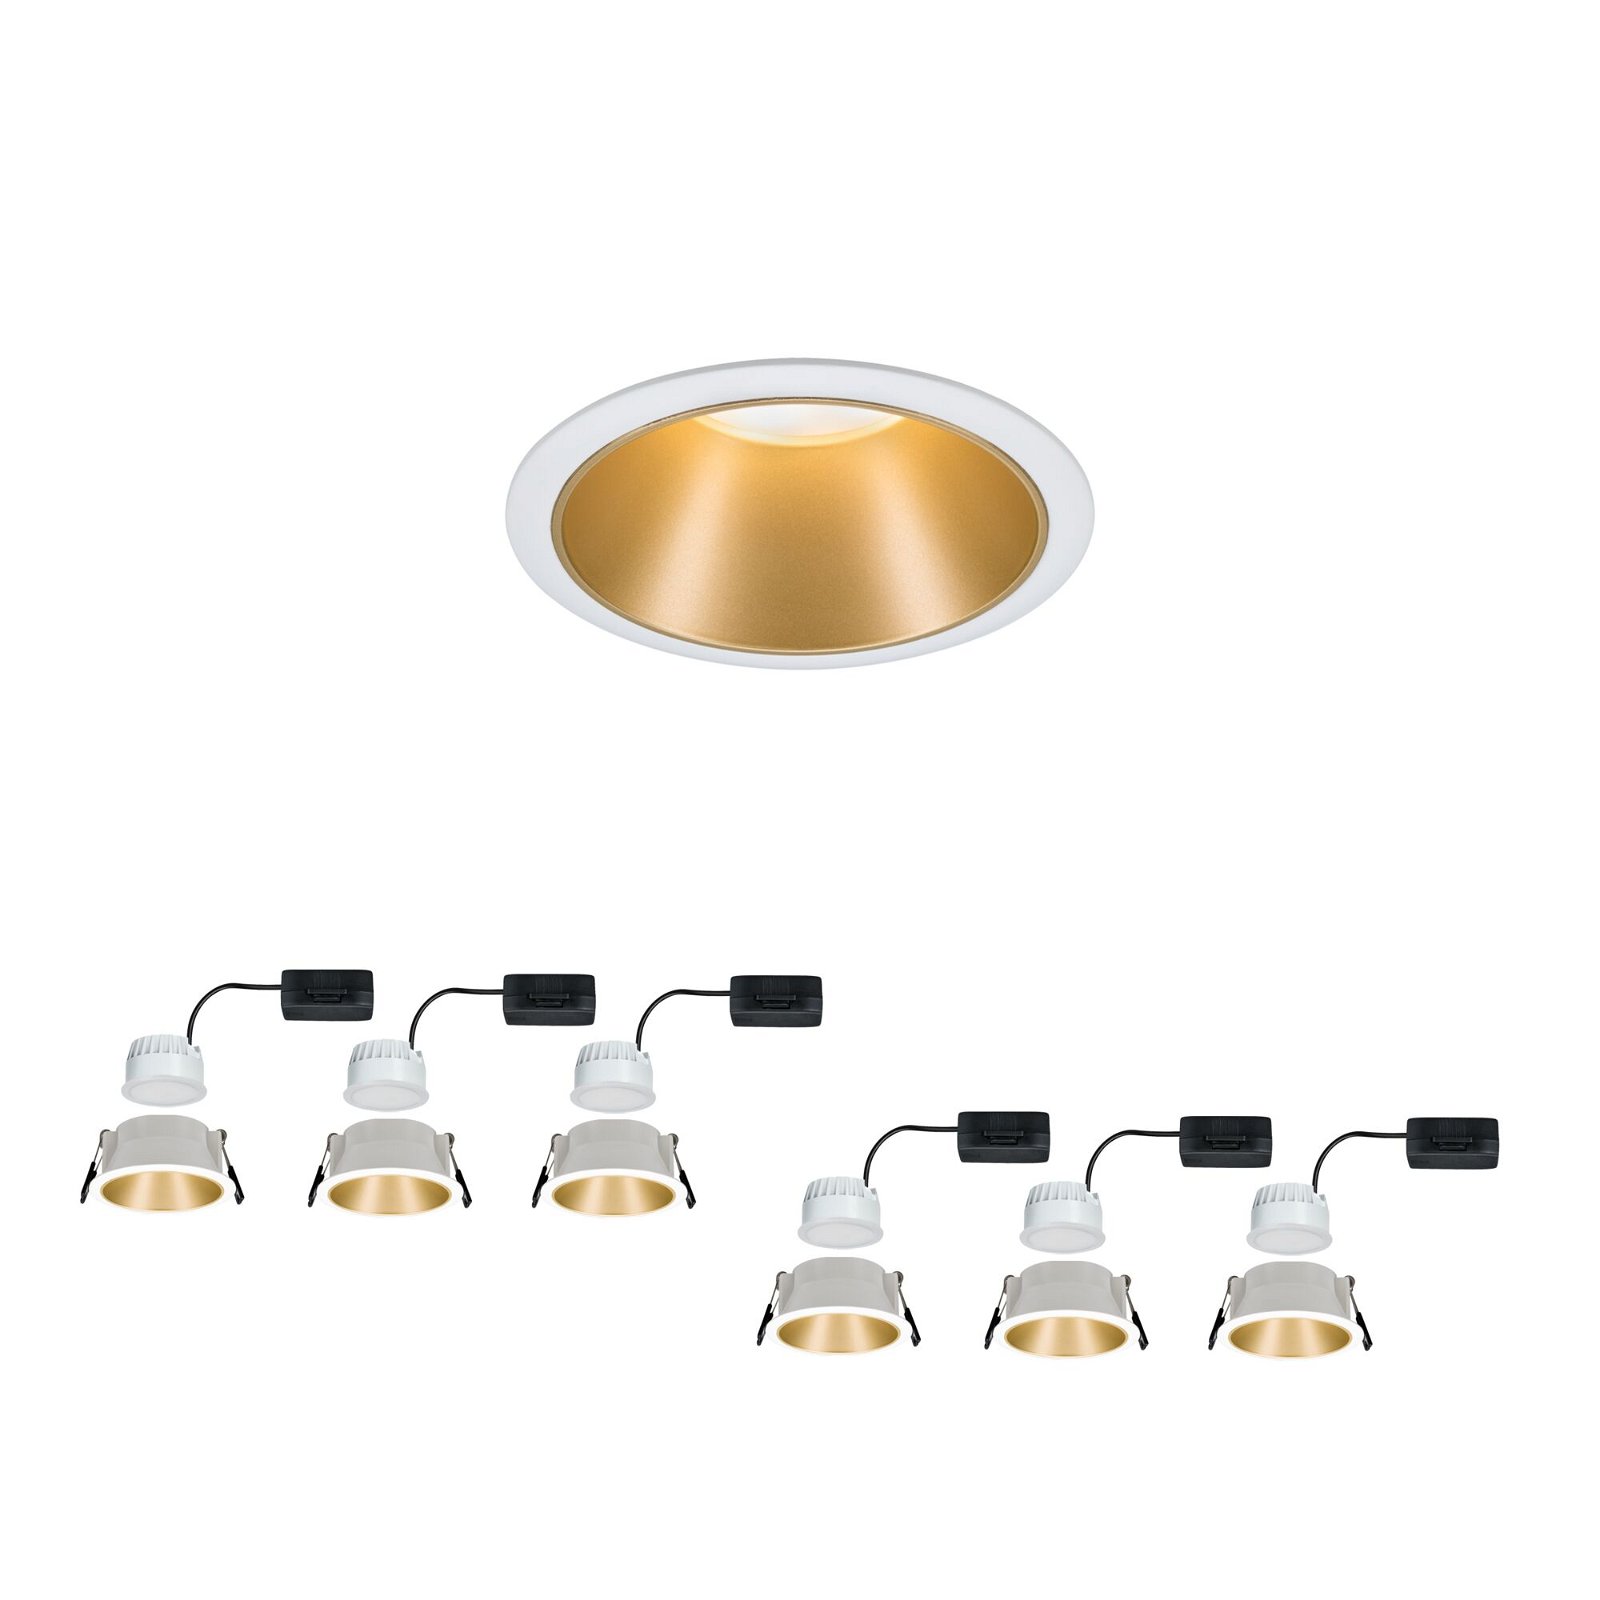 Bundle LED Recessed luminaire 3-Step-Dim Cole 6 pack IP44 round 88mm Coin 3x6W 3x460lm 230V dimmable 2700K White/Gold